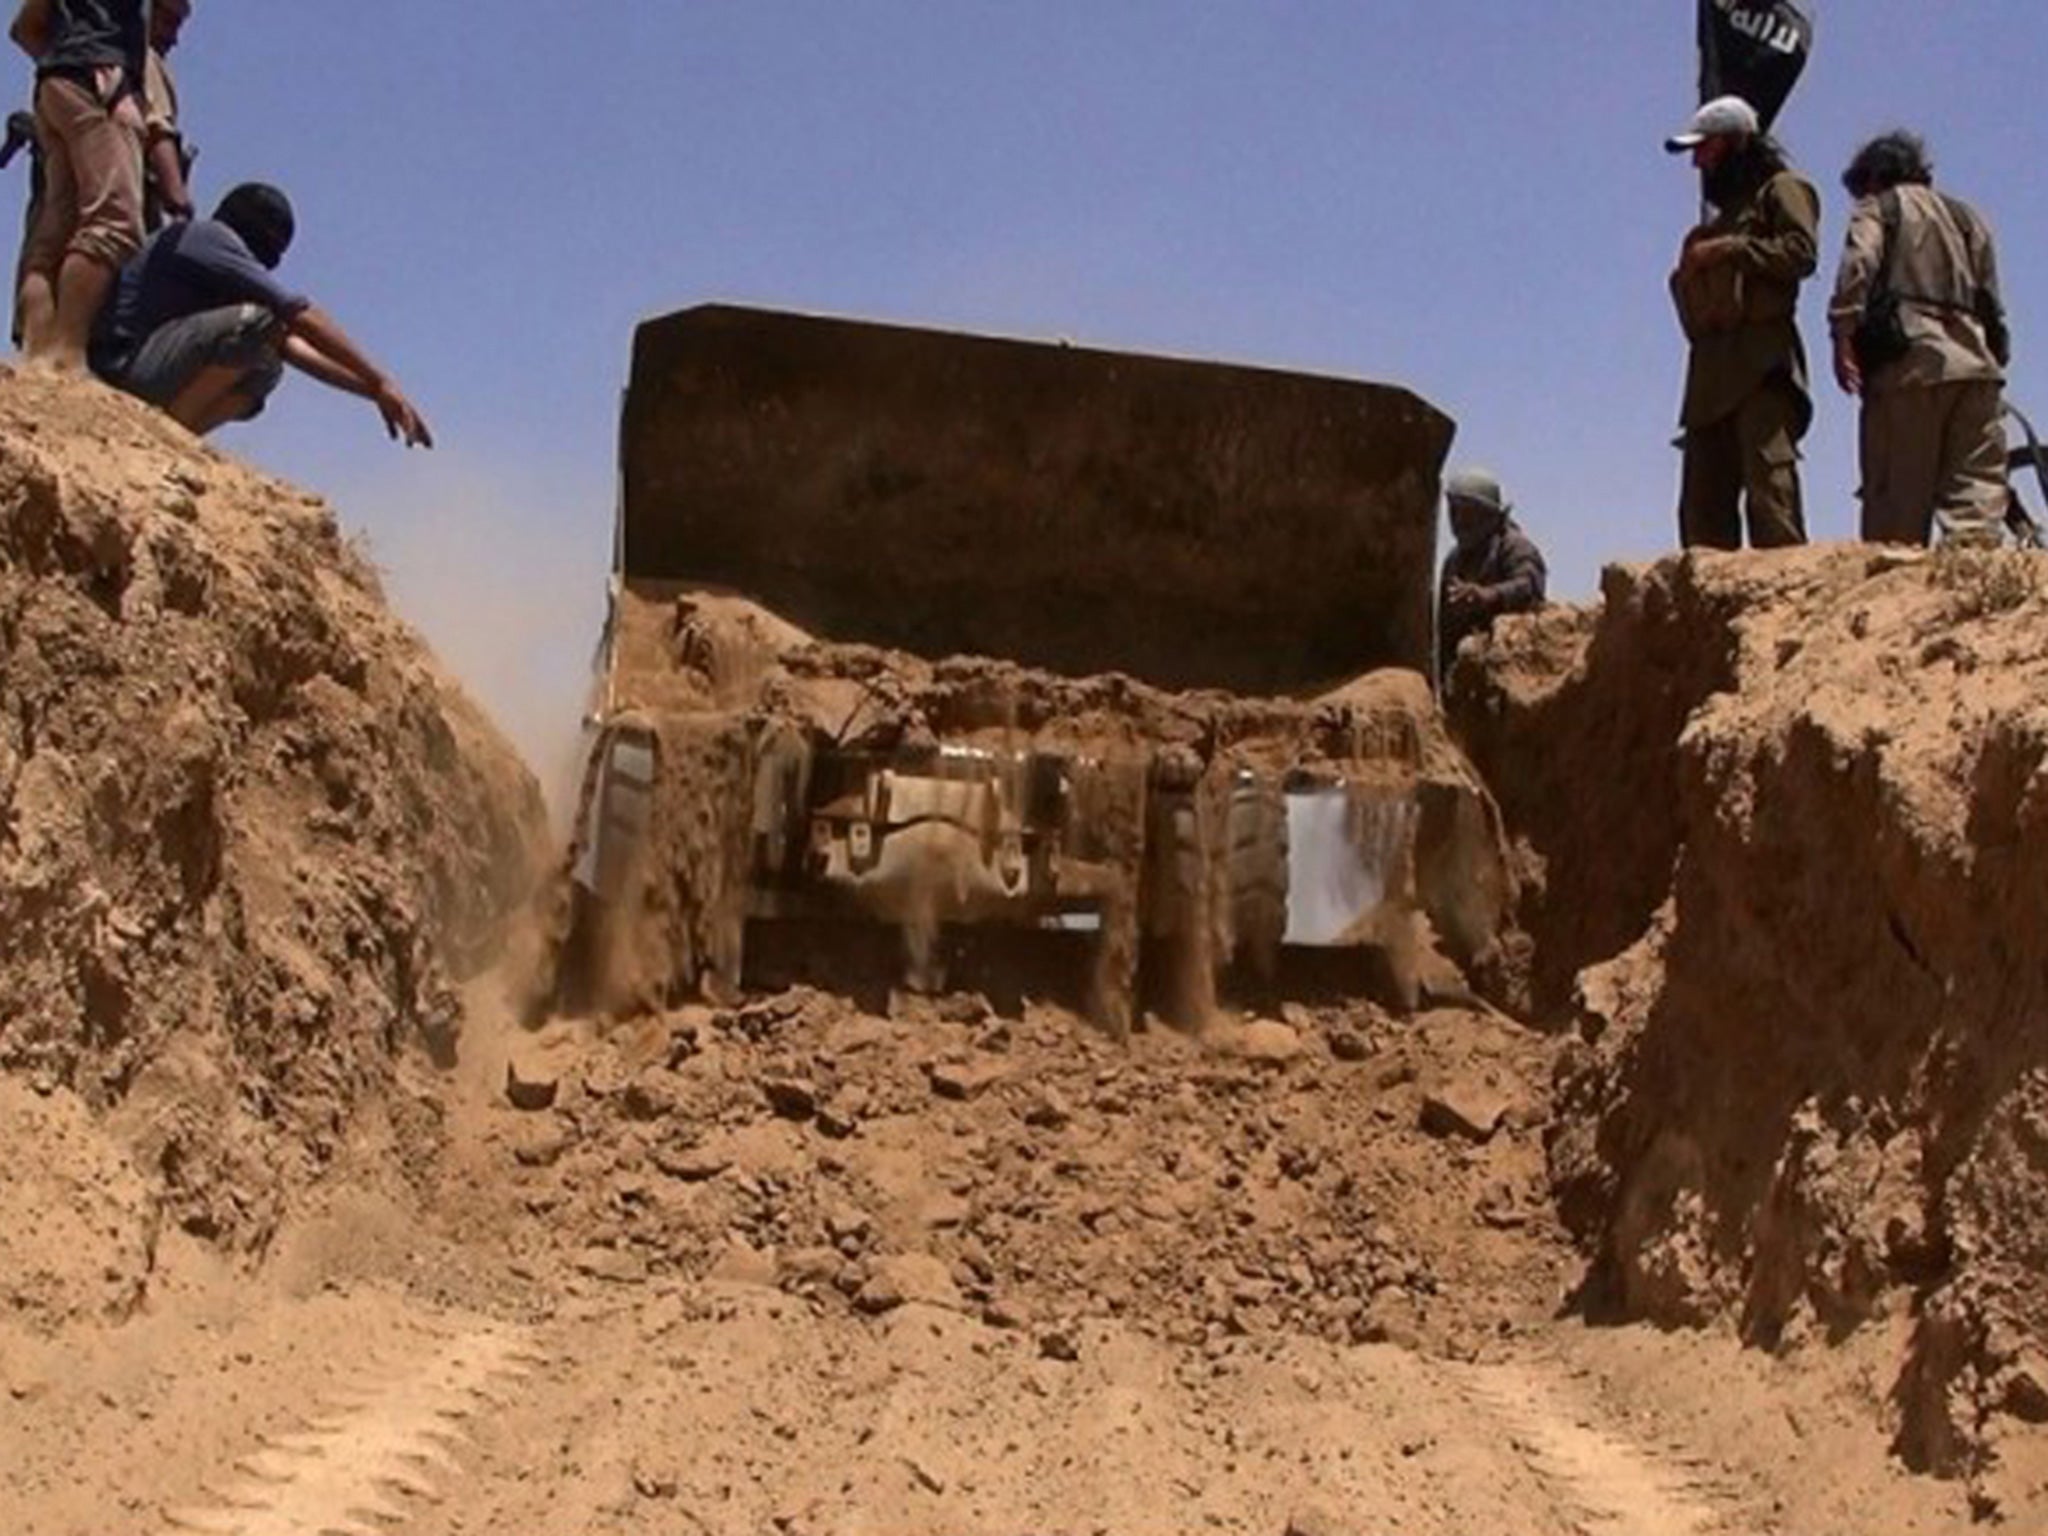 A bulldozer cuts through a sand rampart at the Syrian border in the early Isis video